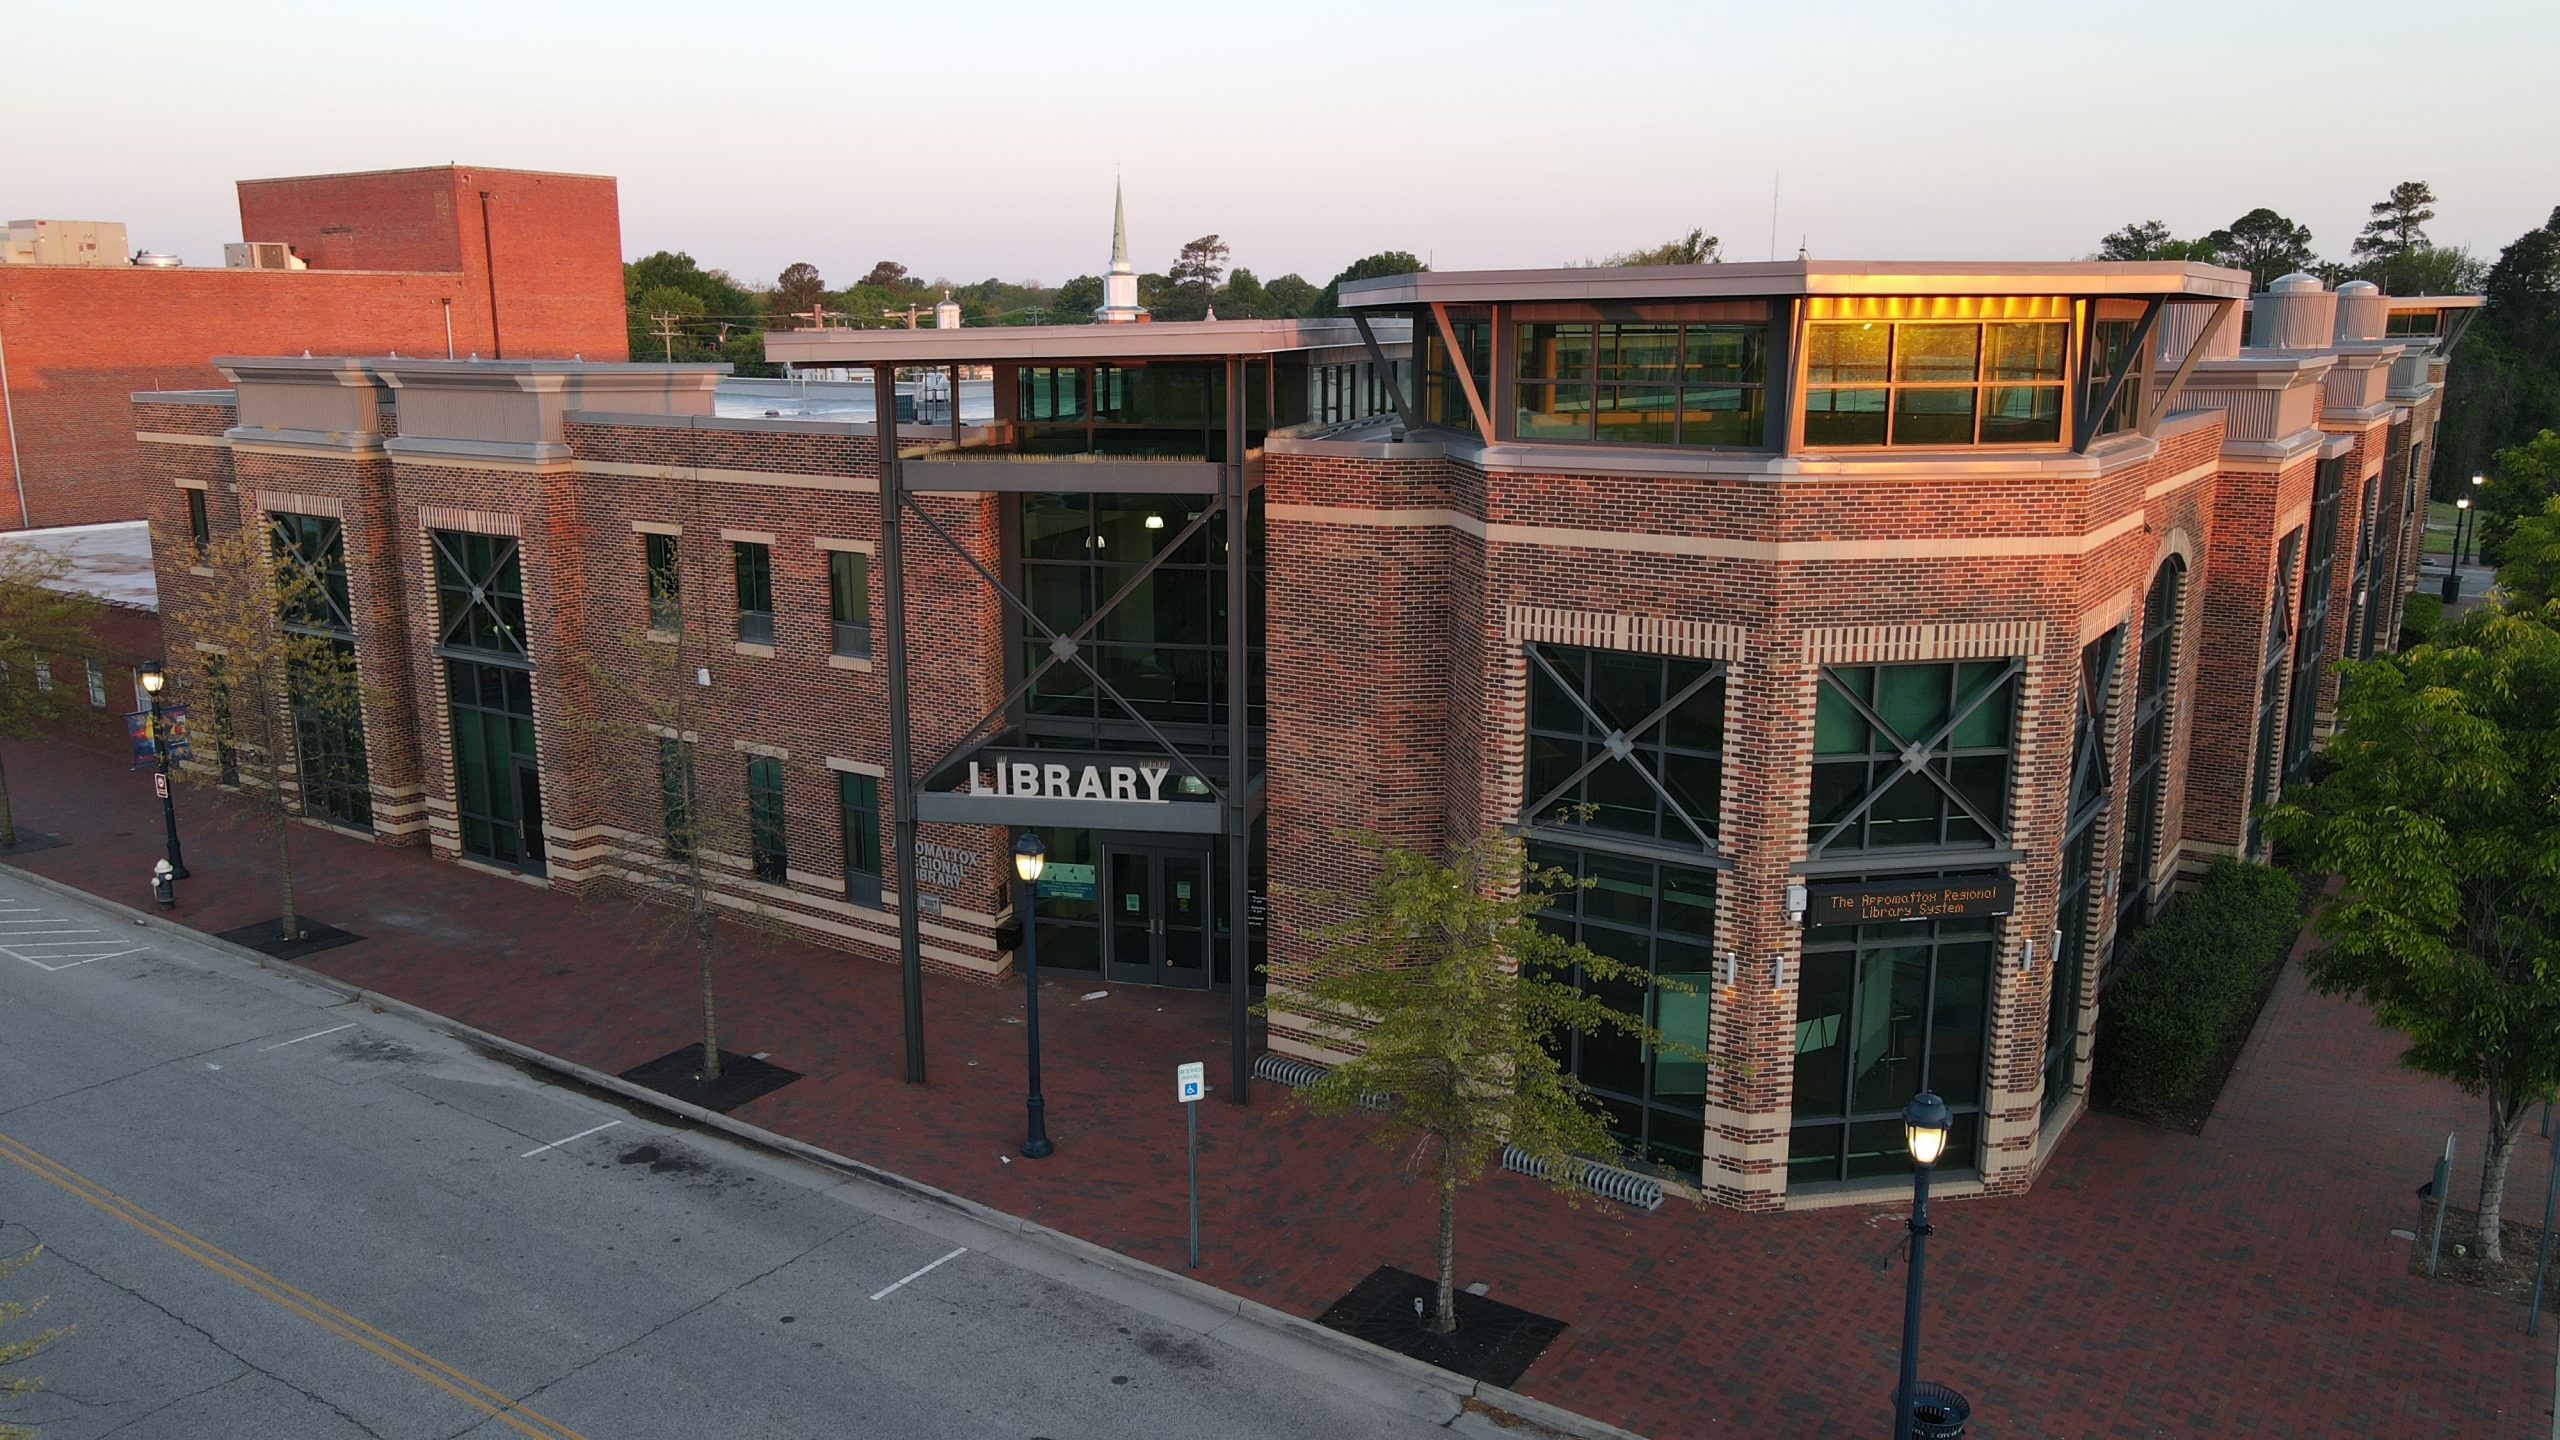 Hopewell Library Exterior, a brick 2-story building with large glass windows